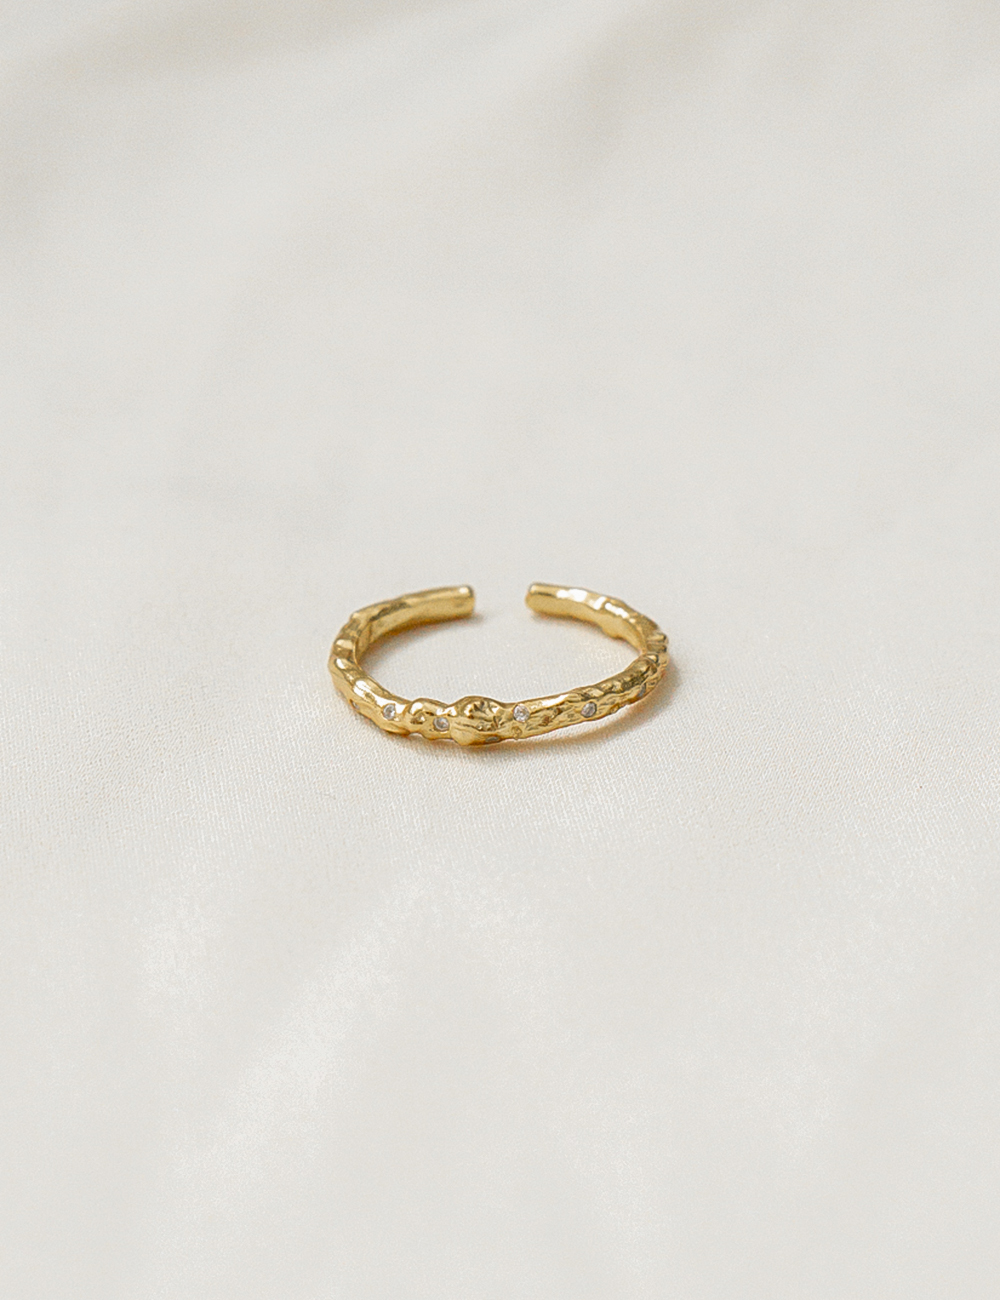 Paige – Guld ring